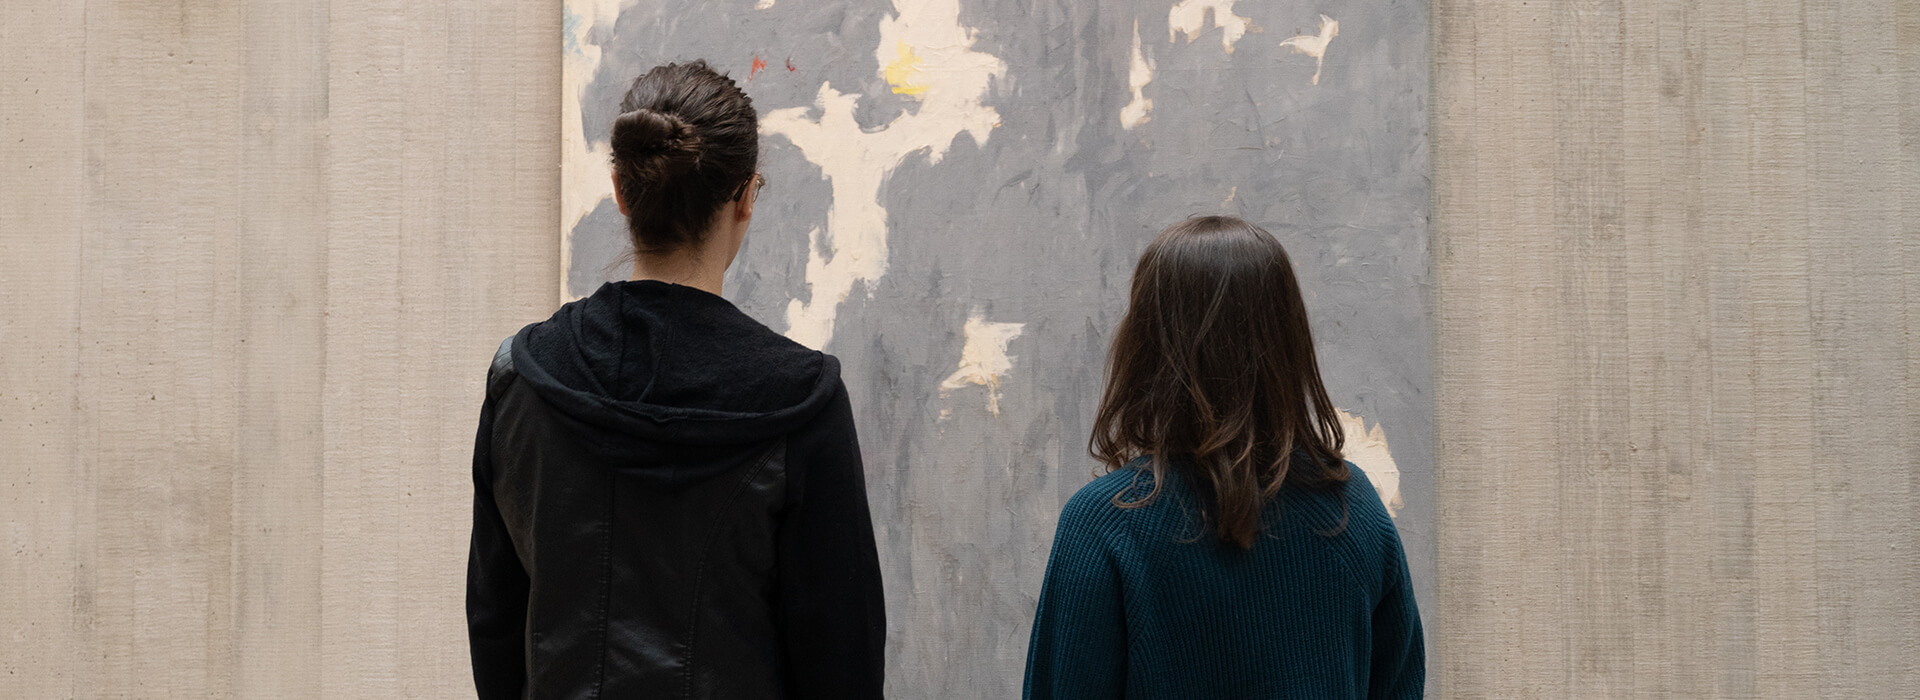 Two women with their backs to the camera look at a blue gray abstract painting on a concrete wall